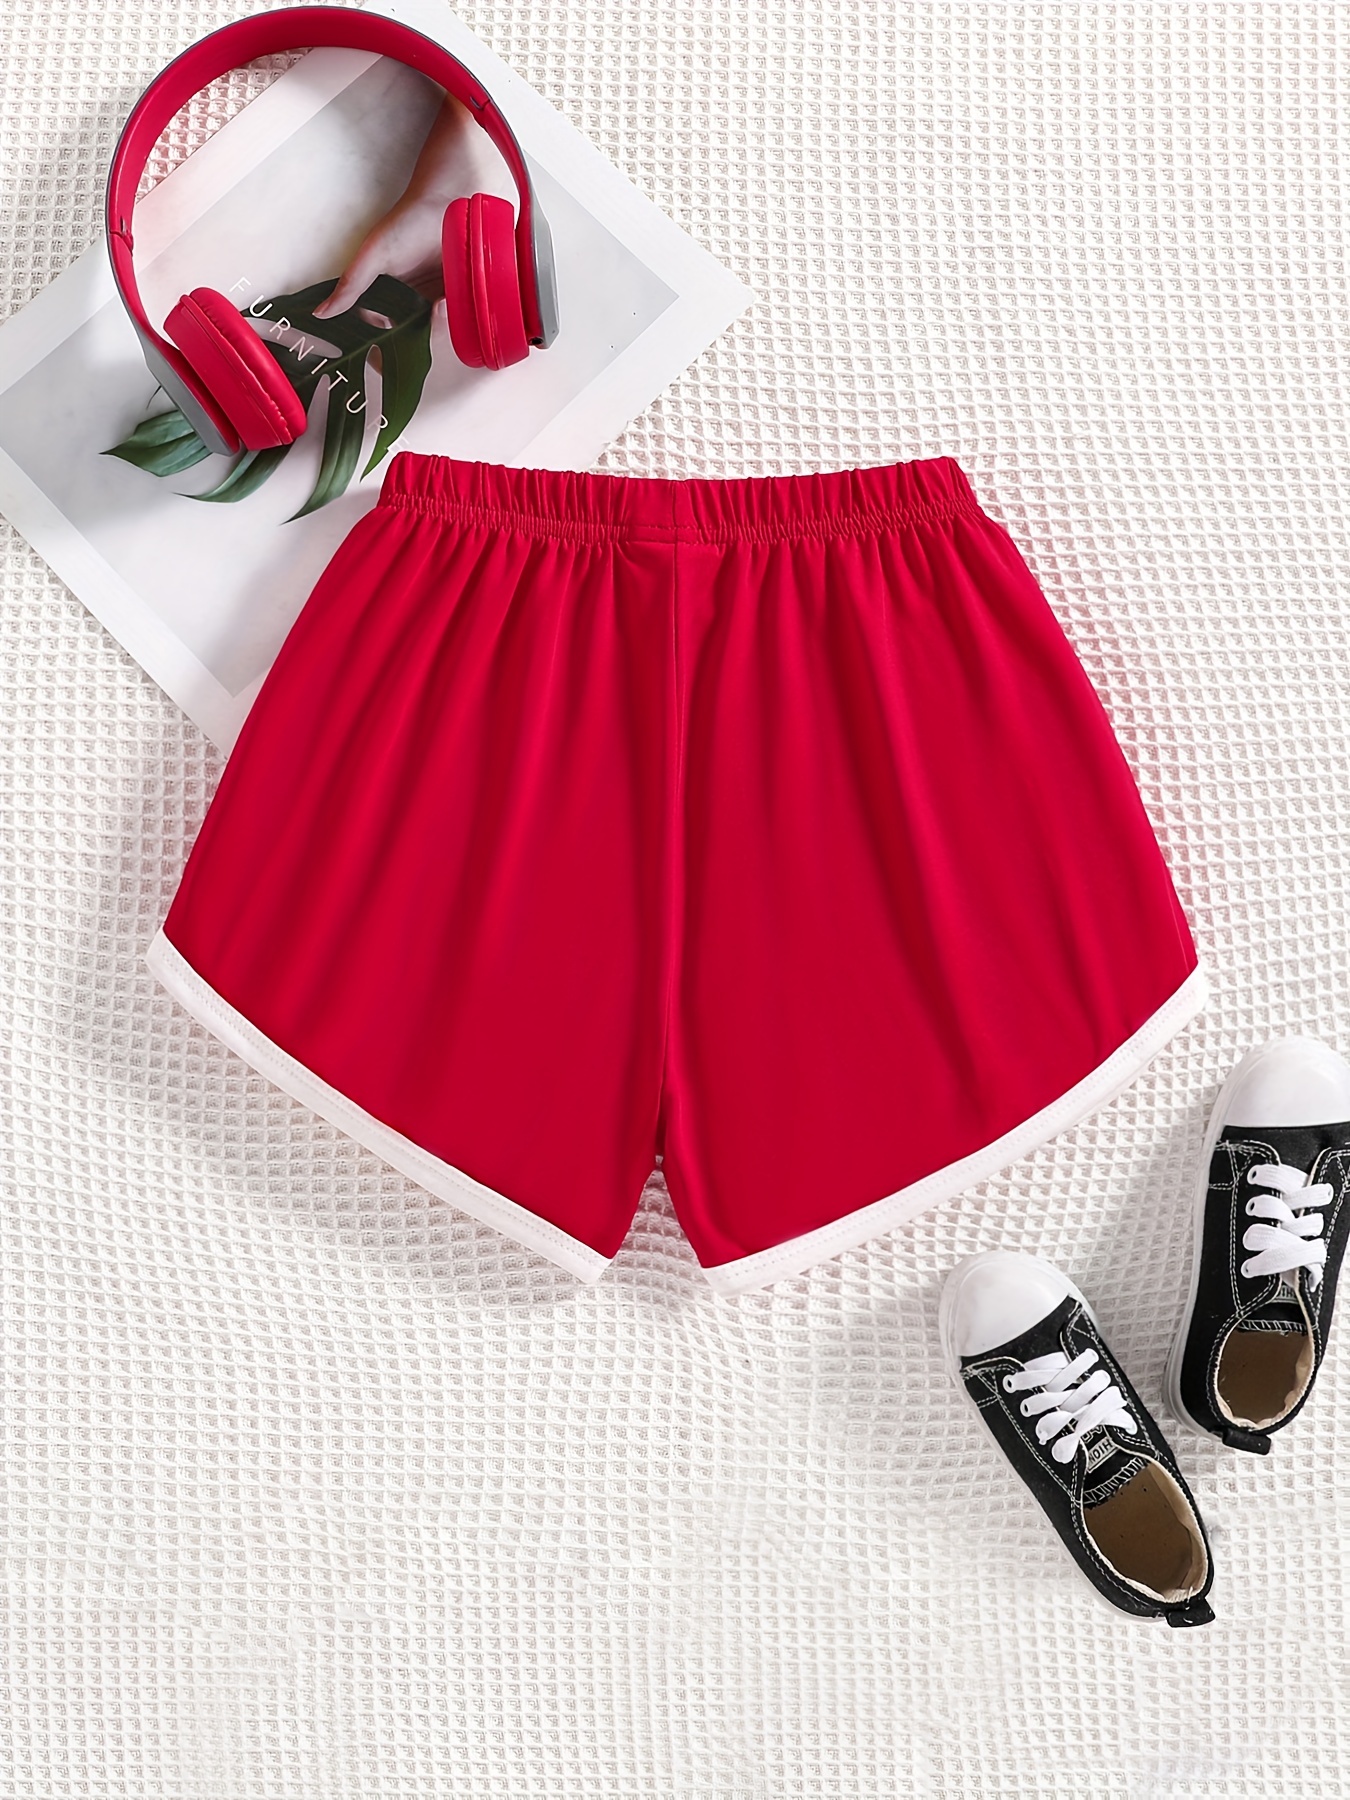 Girls' Basic Shorts, Contrast Binding Comfortable And Breathable